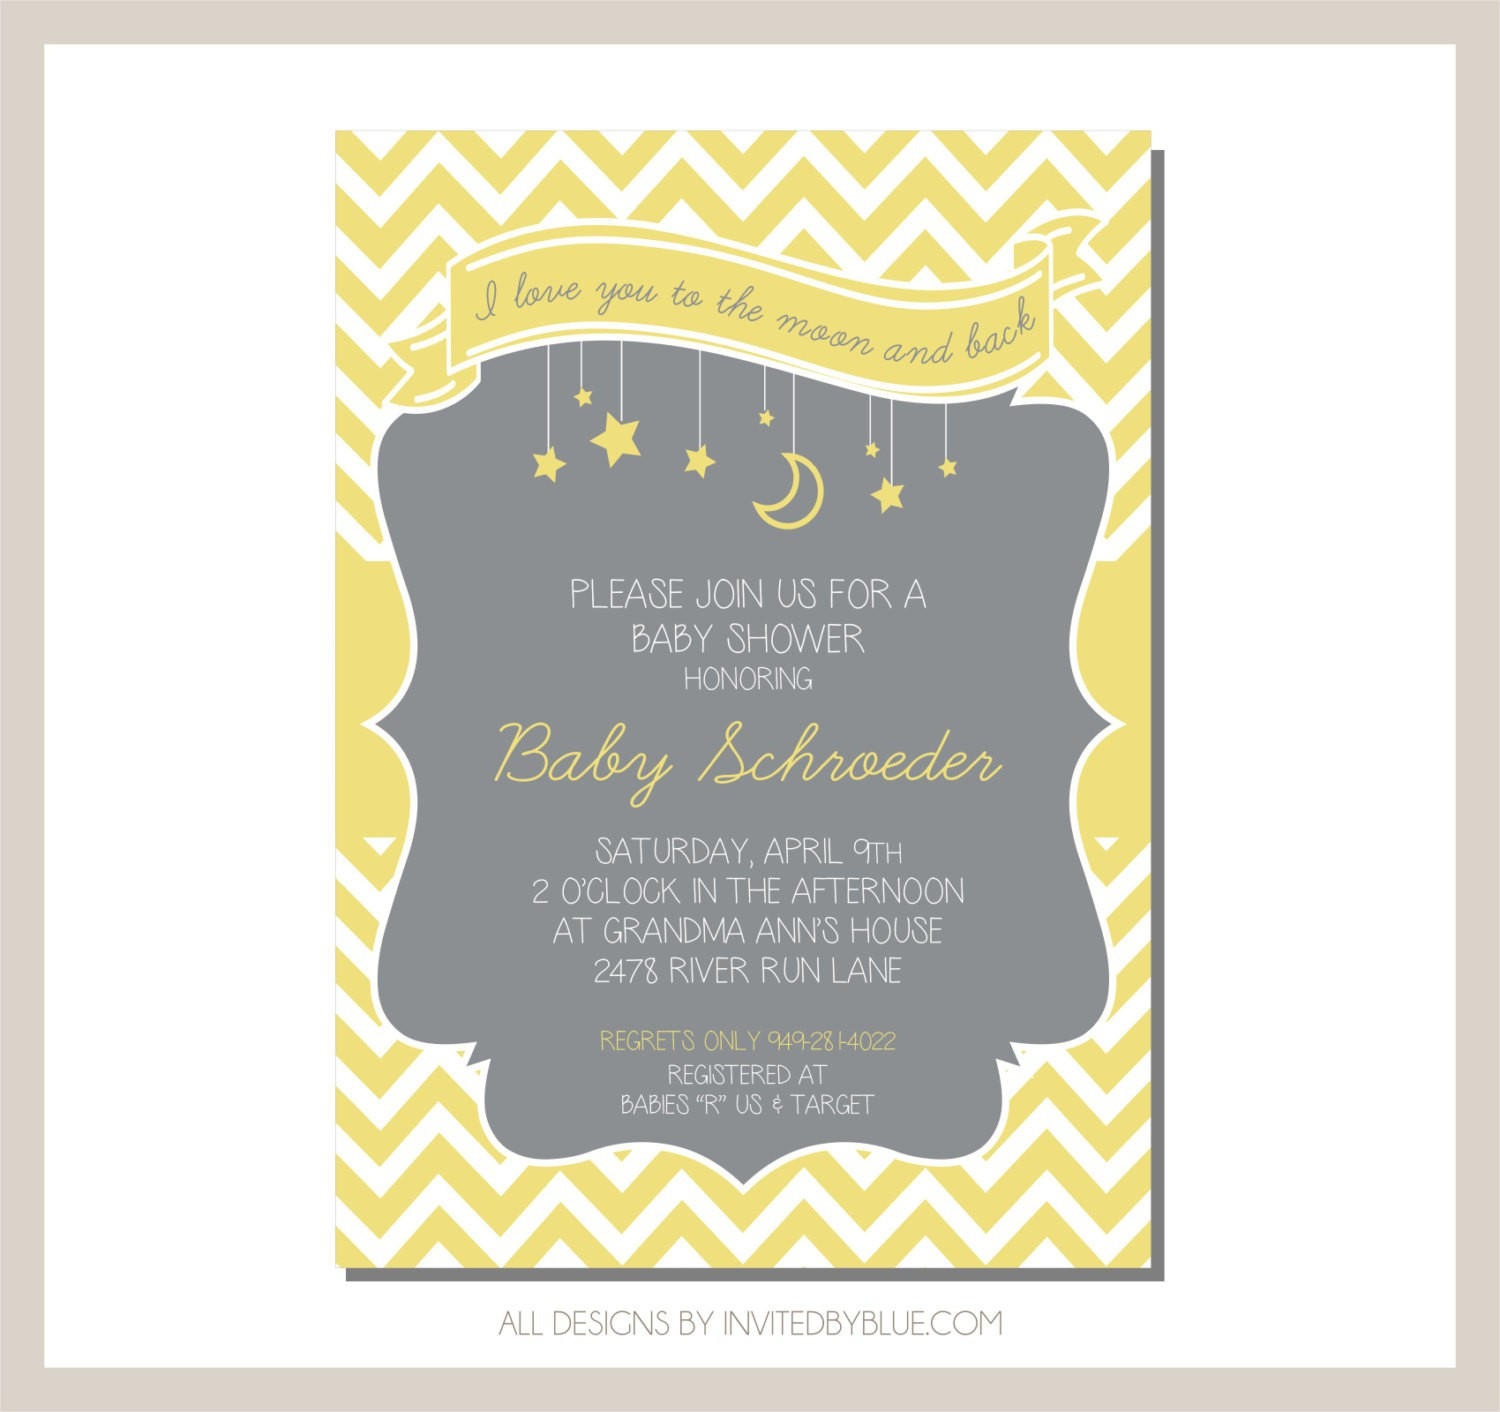 Full Size of Baby Shower:delightful Baby Shower Invitation Wording Picture Designs Baby Shower Invitation Wording Text Baby Shower Invitations Unique Baby 2 Shower Invitation Wording